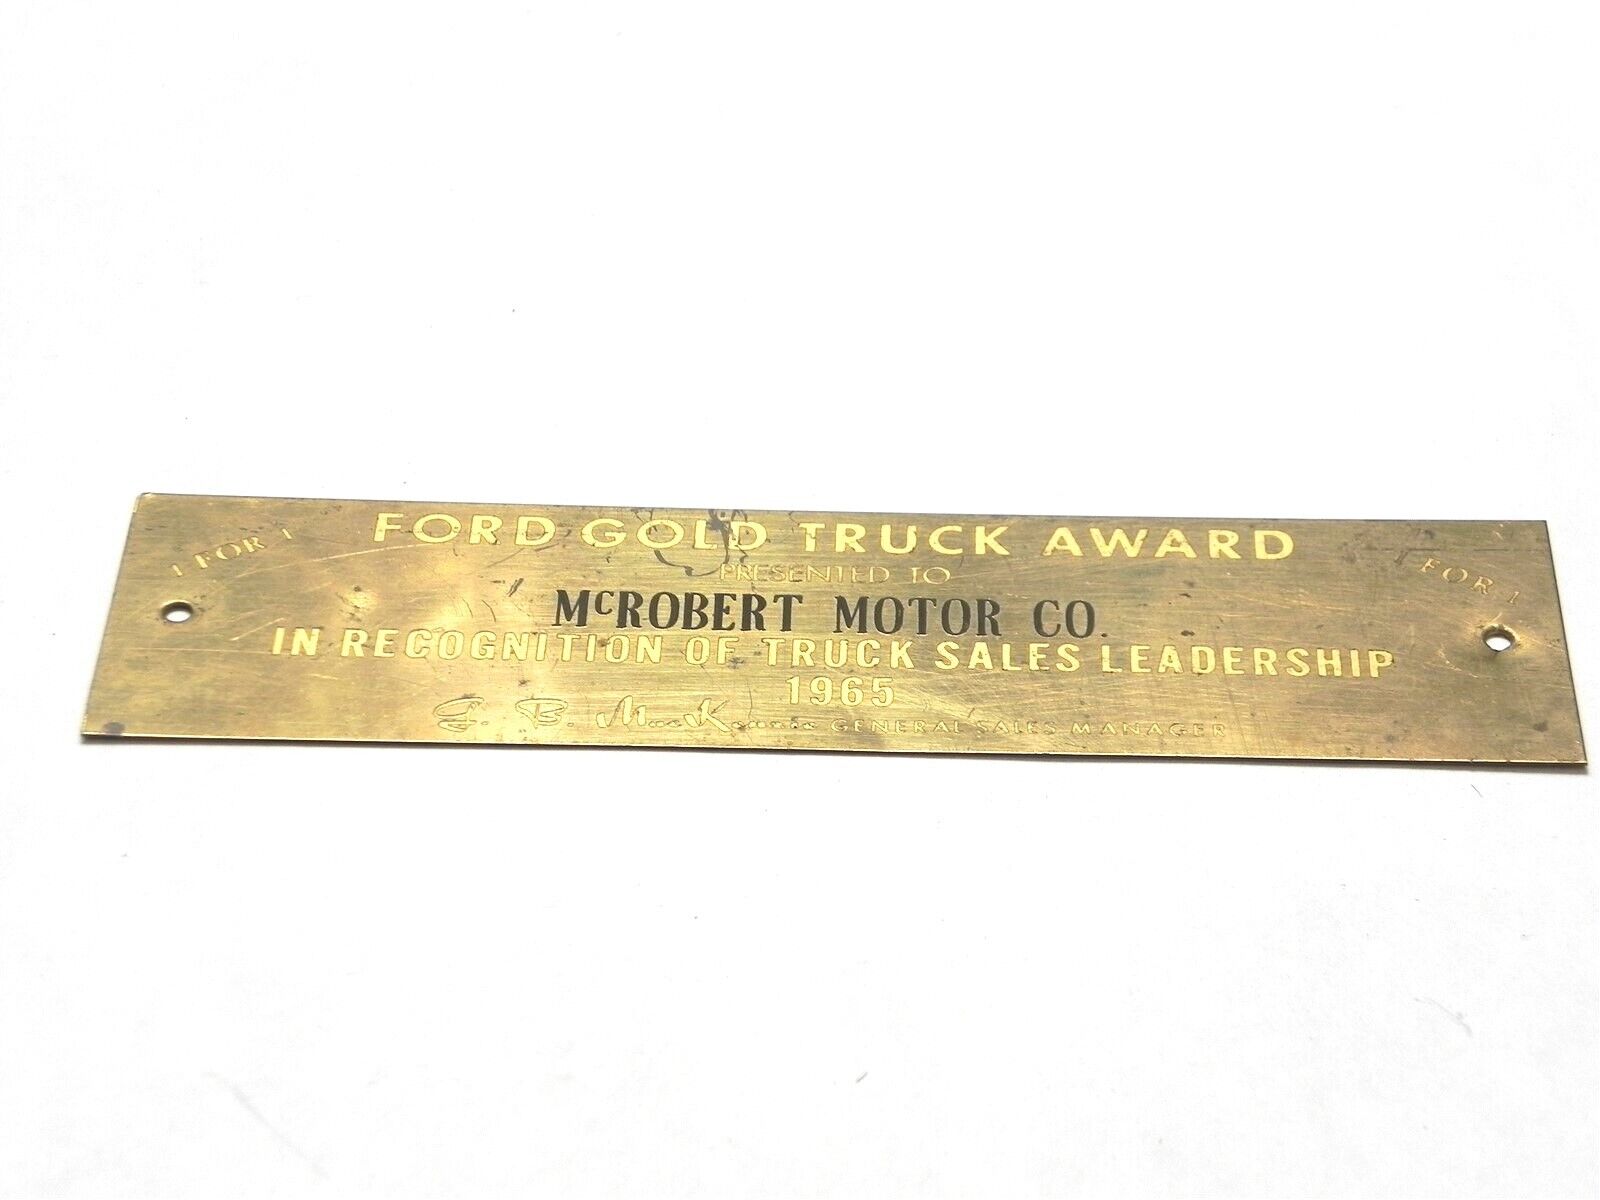 VINTAGE 1965 FORD GOLD TRUCK AWARD MCROBERT MOTOR CO. PLAQUE PLATE PRE-OWNED 